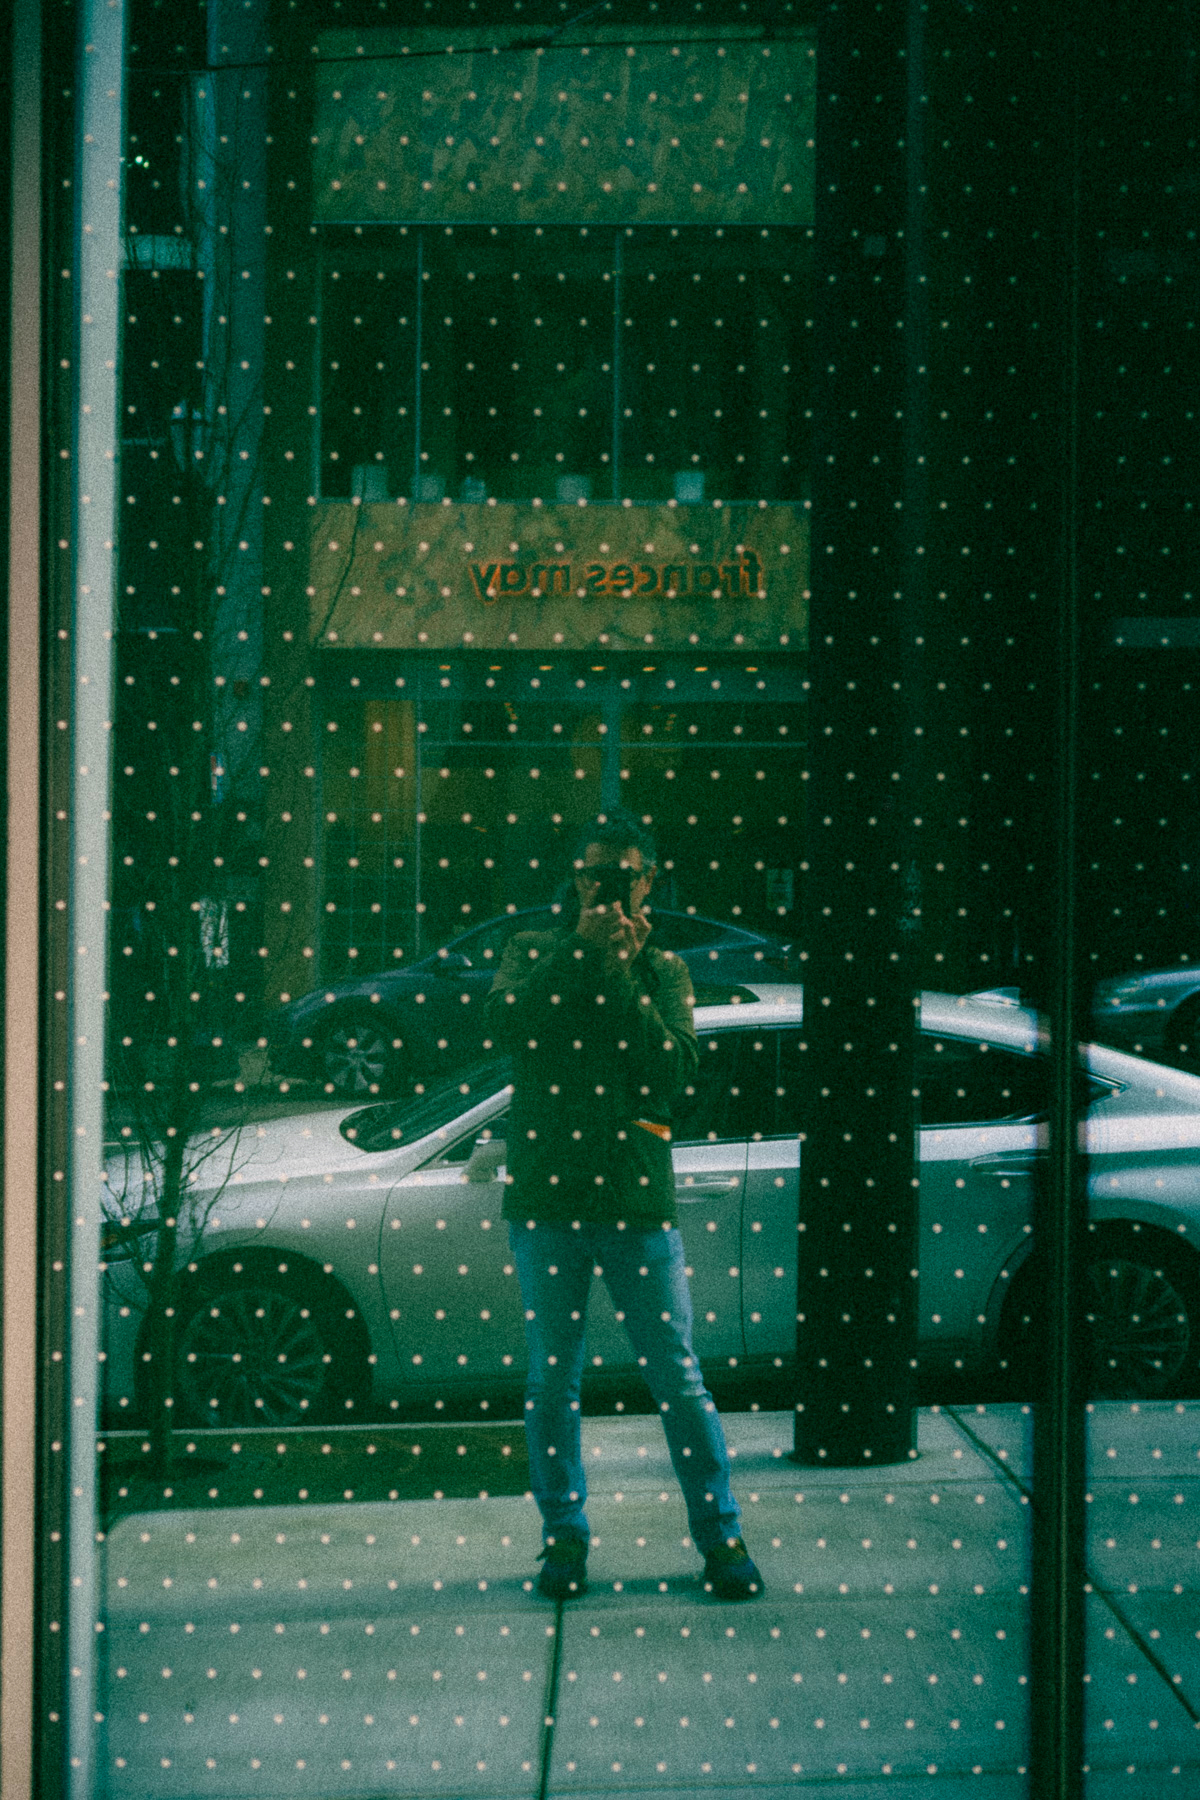 A person taking a selfie in a window reflecting an urban street scene with parked cars. The window has a grid of white dots.